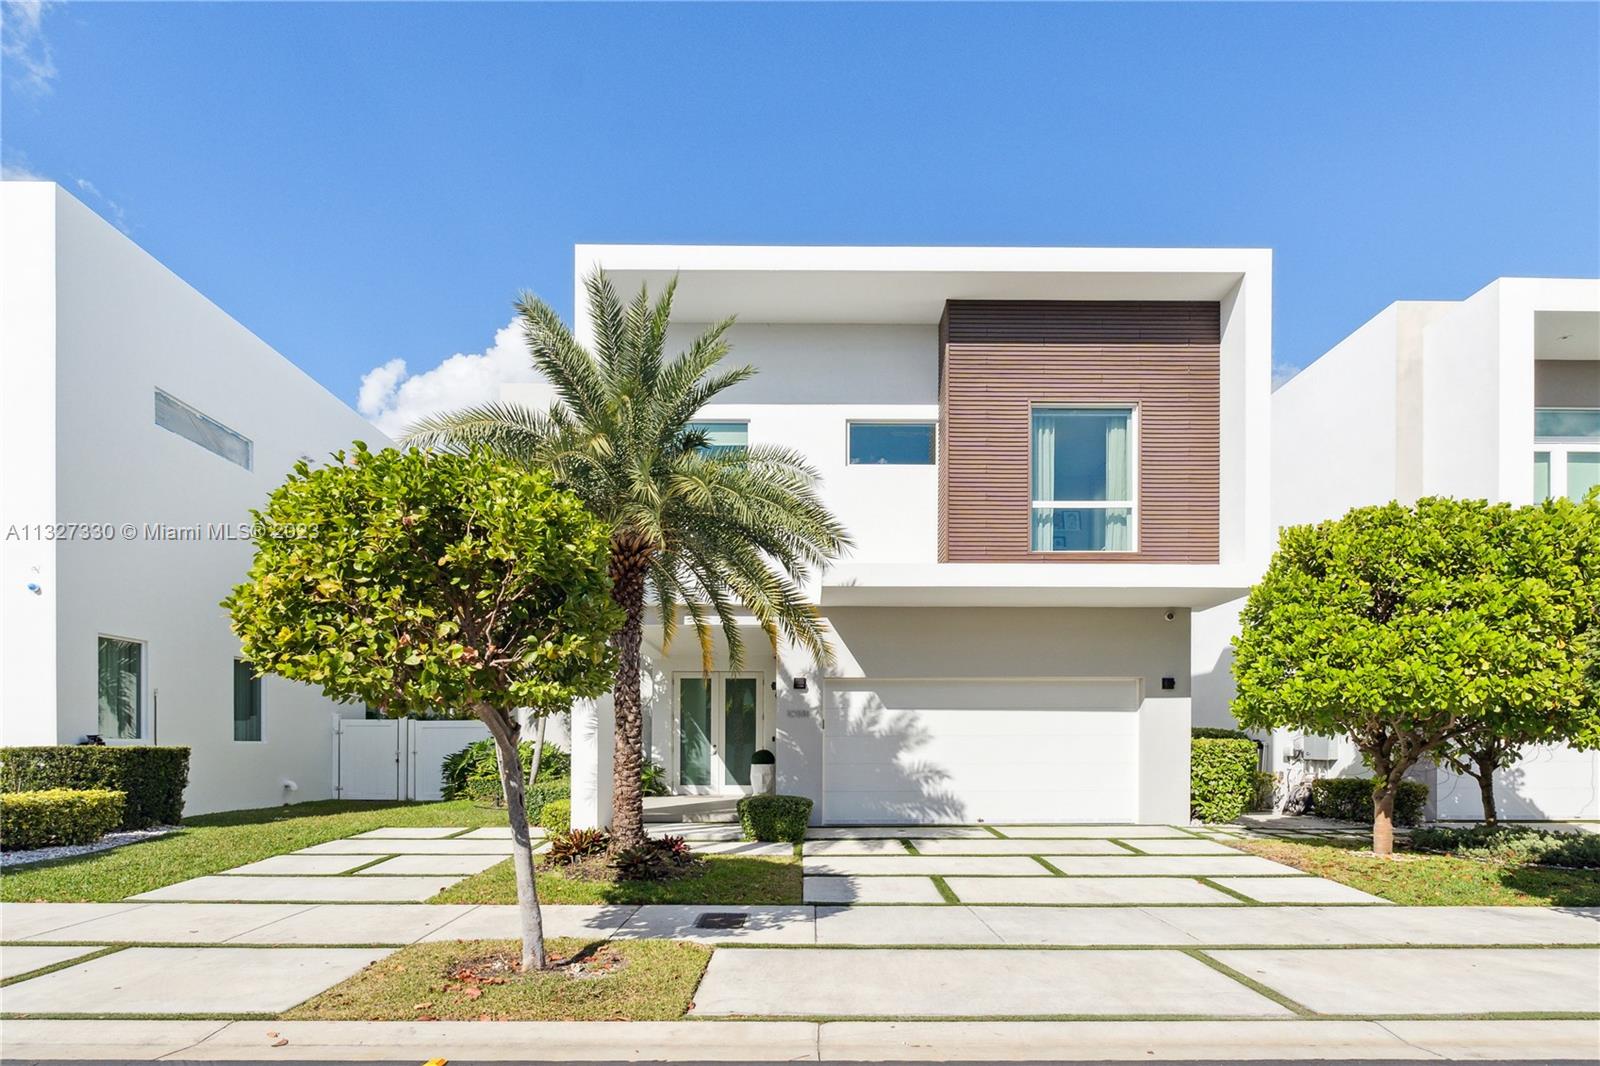 A one-of-a-kind prestigious house, located in the most coveted and exclusive gated community in Doral, The Mansions. This house features 5 bedrooms, 4 full bathrooms and 1 1/2 bathrooms, with a bedroom and full bath on the first floor. This spectacular property is a smart home, and high-impact windows and doors. Subzero and Wolf appliances, top-of-the-line cabinetry and quartz countertops, electric shades, and California closets in all rooms, with interior, and exterior audio systems. Covered Terrace, built-in-outside kitchen with grill and mini freezer. Appointments only with 24-hour notice, please text the Listing Agent.